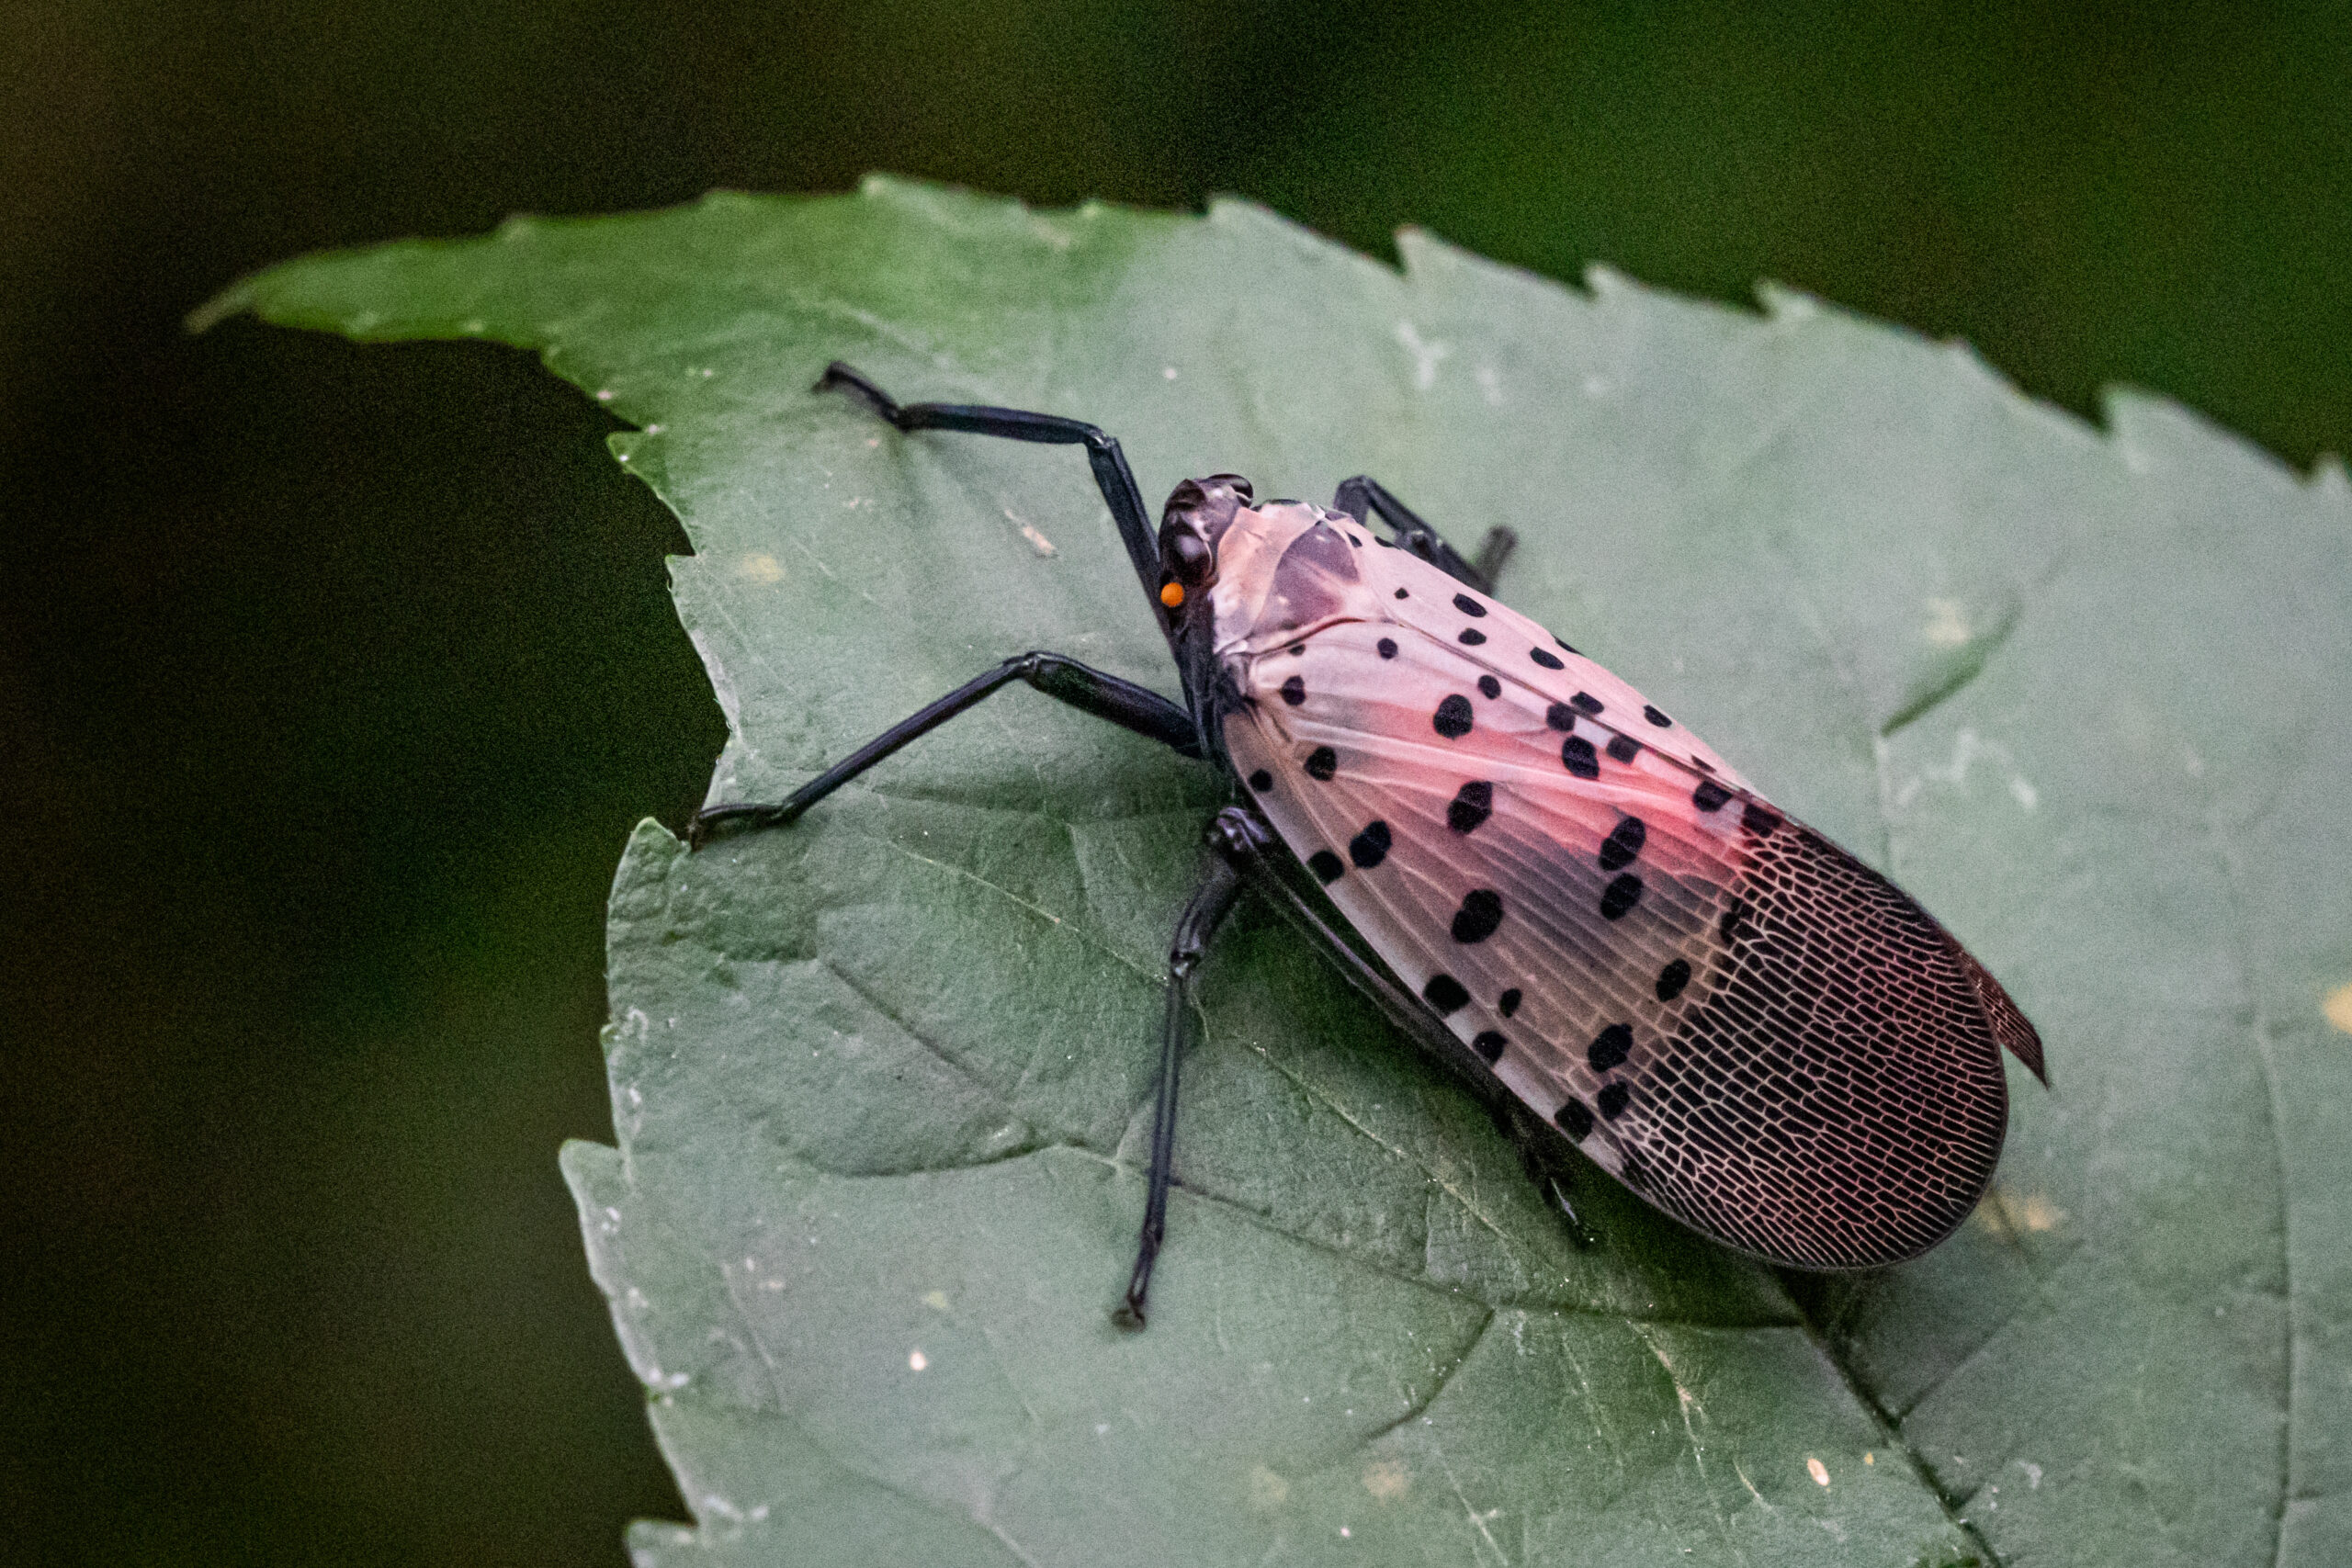 A spotted lanternfly stands on a leaf in a natural surrounding